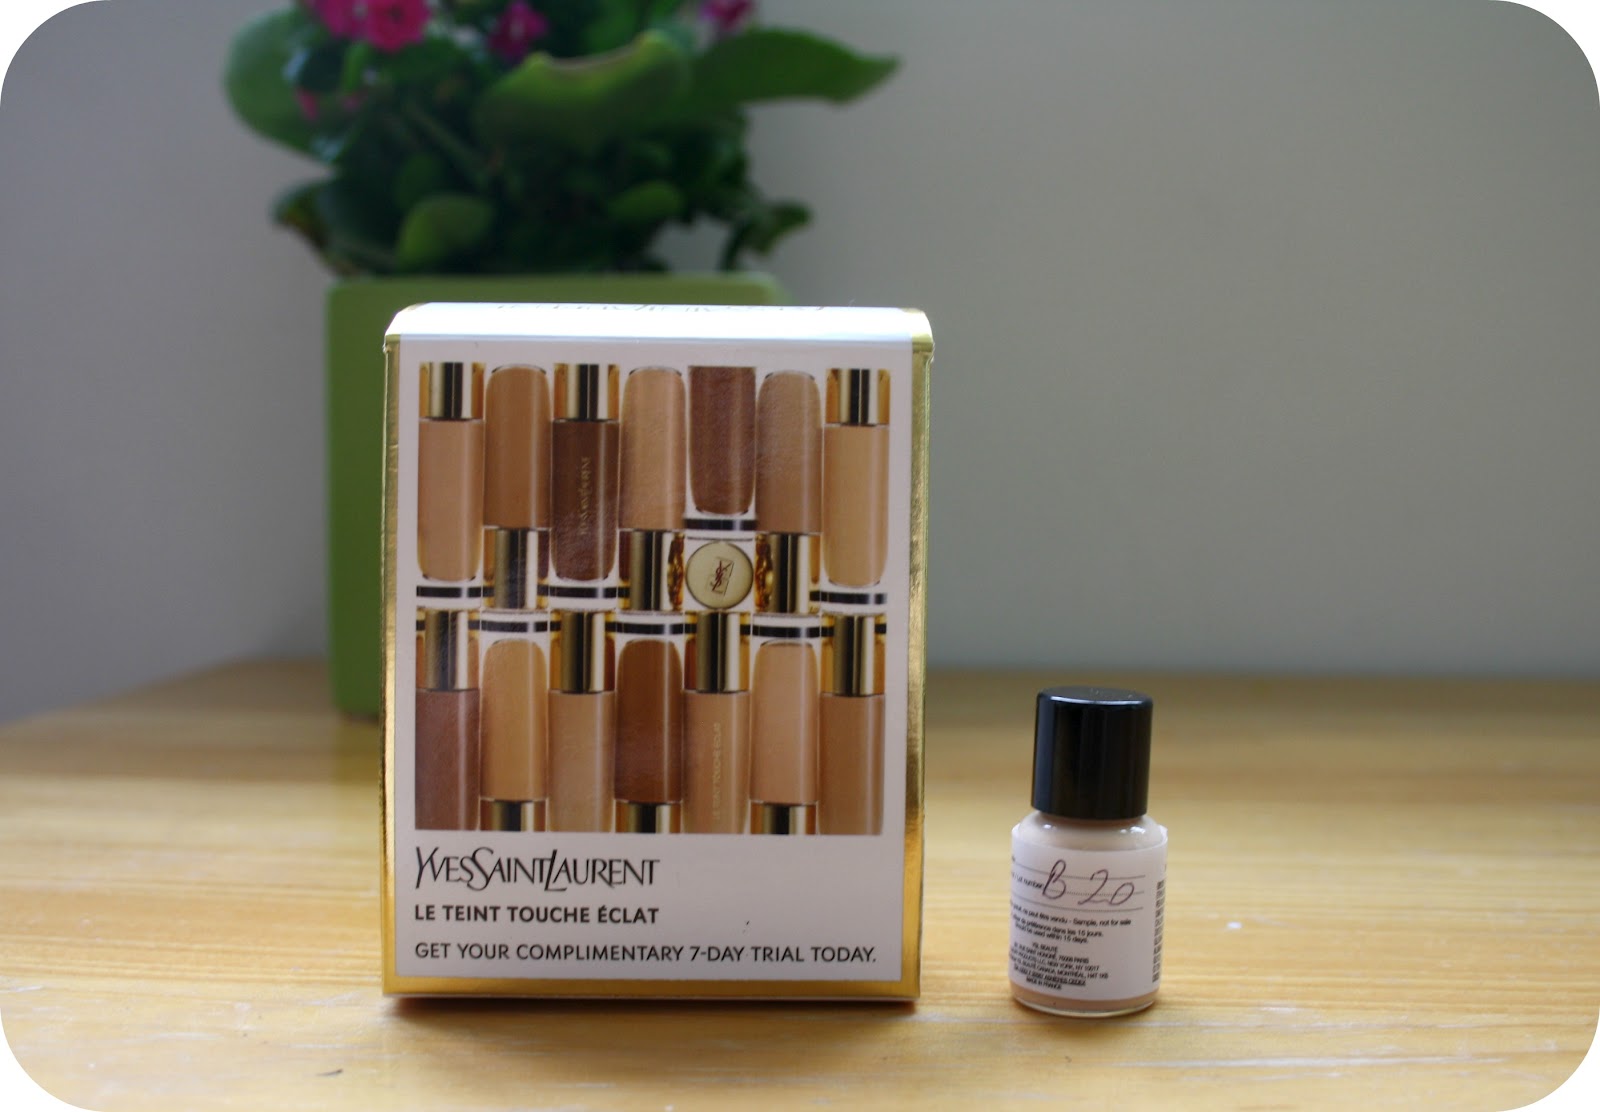 ysl touche eclat foundation review